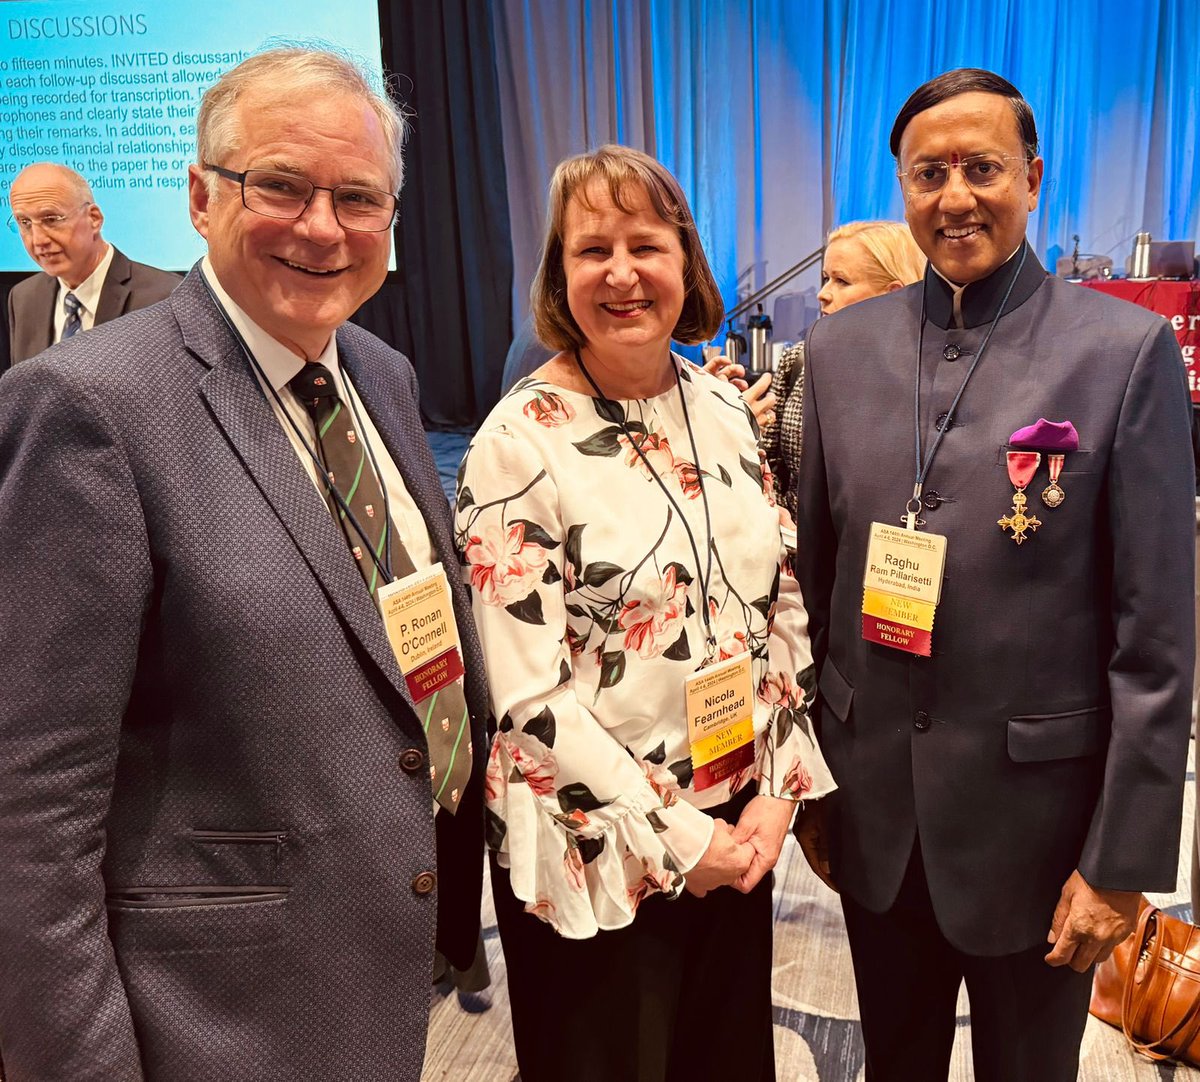 Honoured to join other #honoraryFellows @AmerSurg #opening session alongside @PaulinaSalminen @ProfW_edinsurg and Raghu Ram Pillarisetti #OBE #AssocSurgeonsIndia. Thanks to supporters and nominations.